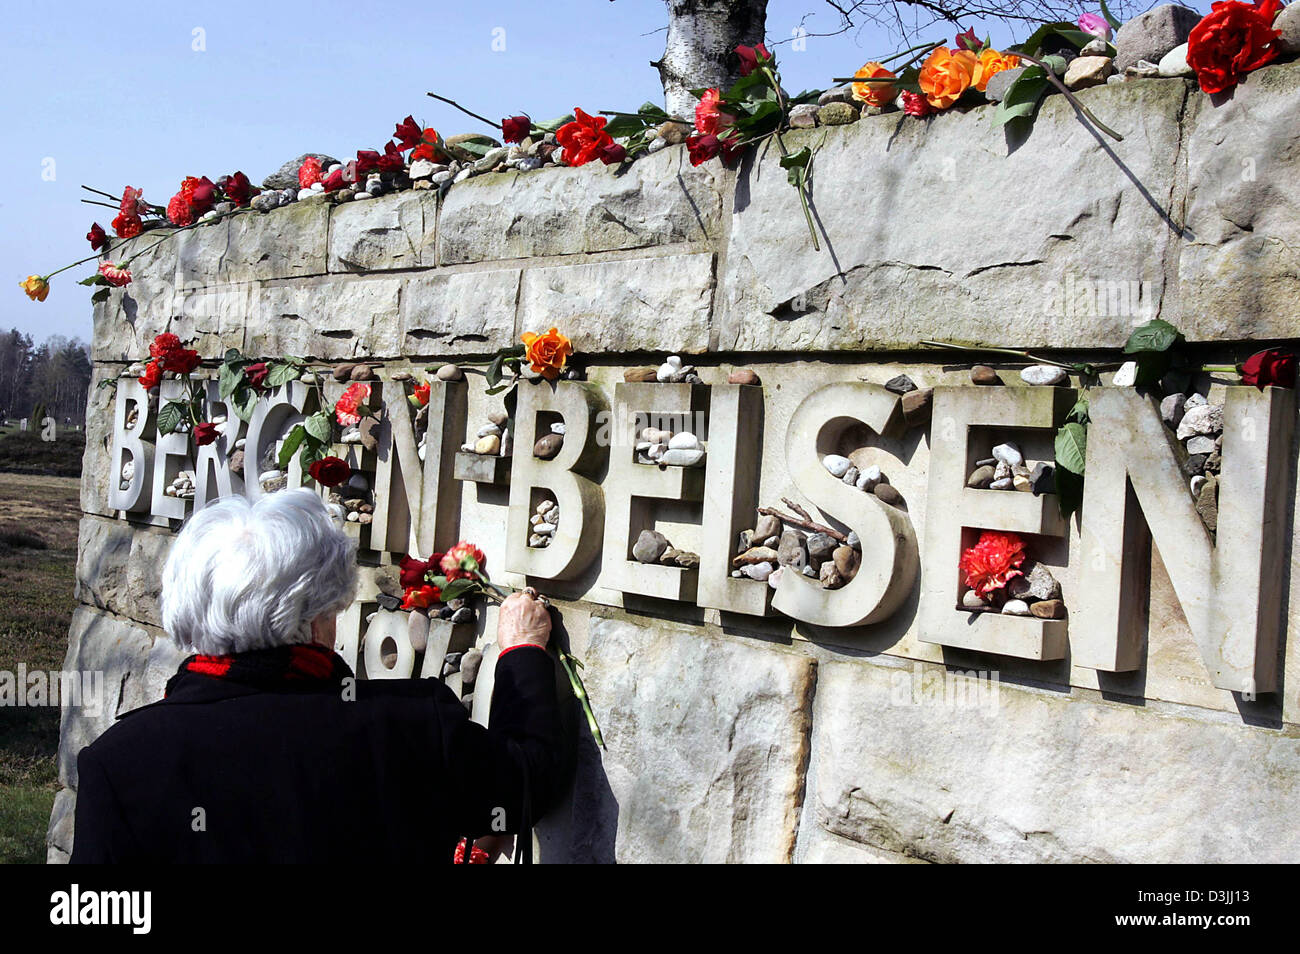 (dpa) - A survivor puts down flowers at a memorial stone on the occasion of the 60th anniversary of the liberation of the concentration camp in Bergen-Belsen, Germany, 15 April 2005. Bergen-Belsen camp was liberated by British troops on 15 April 1945. 100,000 prisoners from 40 countries, among them 50,000 Soviet prisoners of war and 30,000 Jews, died in the camp. The official memor Stock Photo